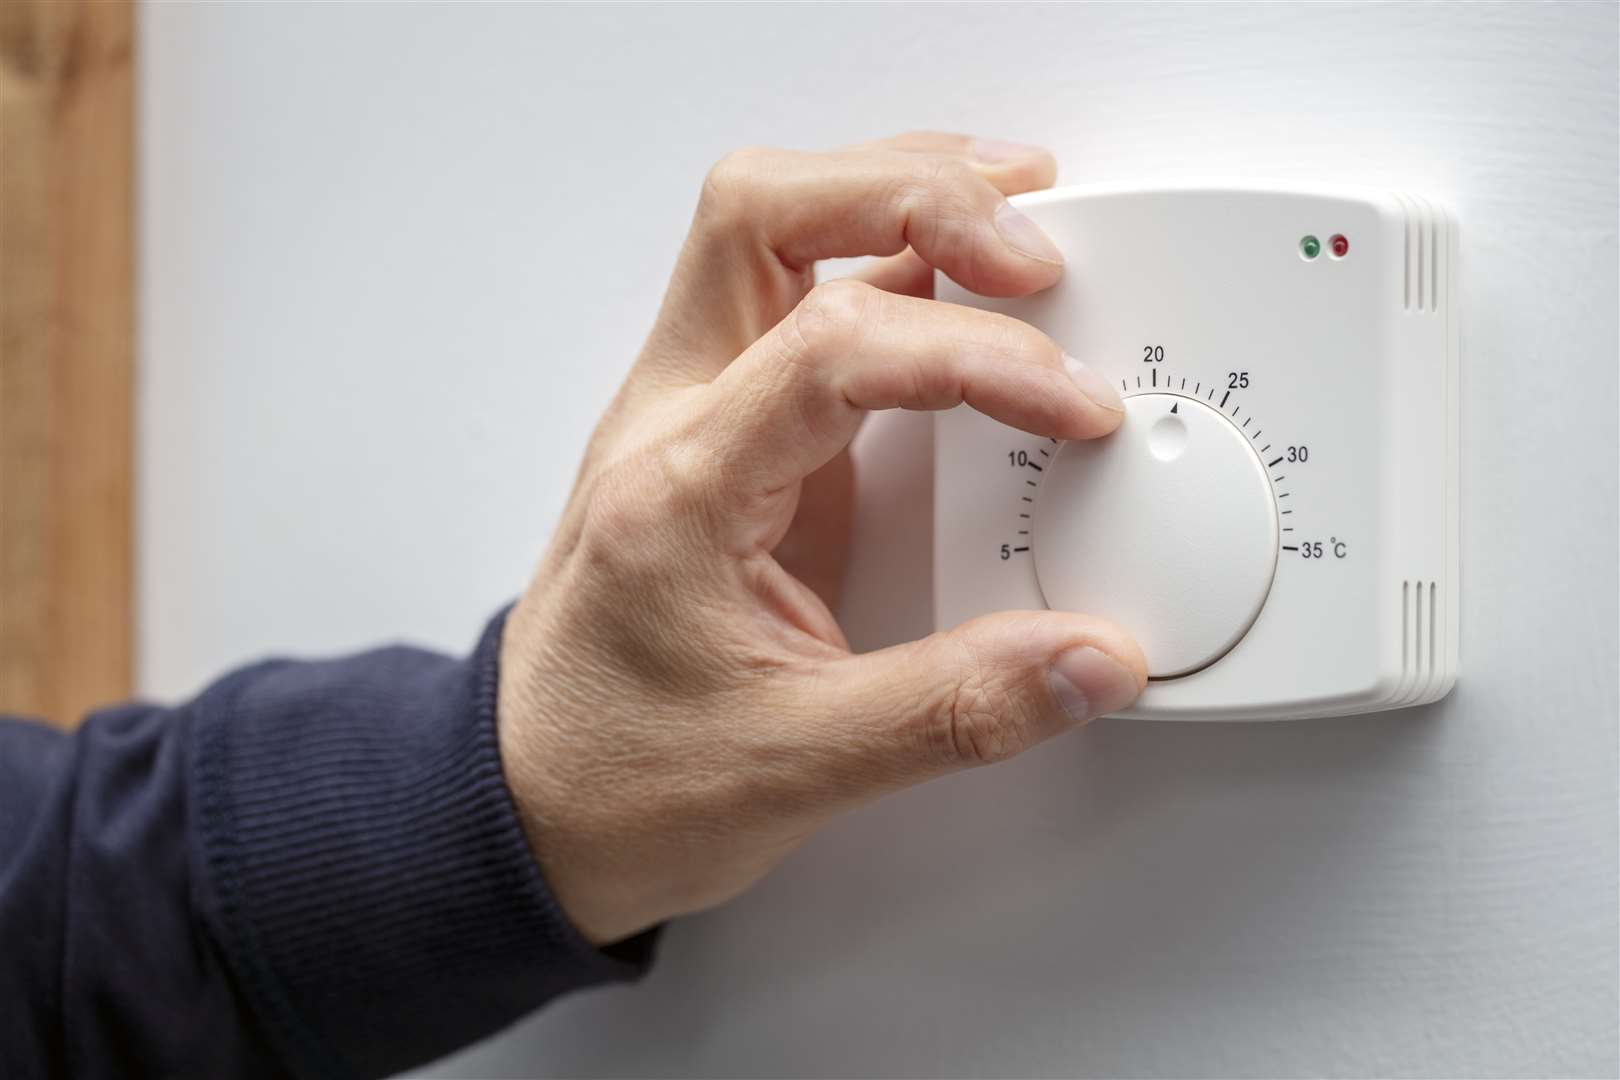 Those avoiding switching on the heating may be glad to hear a milder winter may lay ahead. Image: iStock.